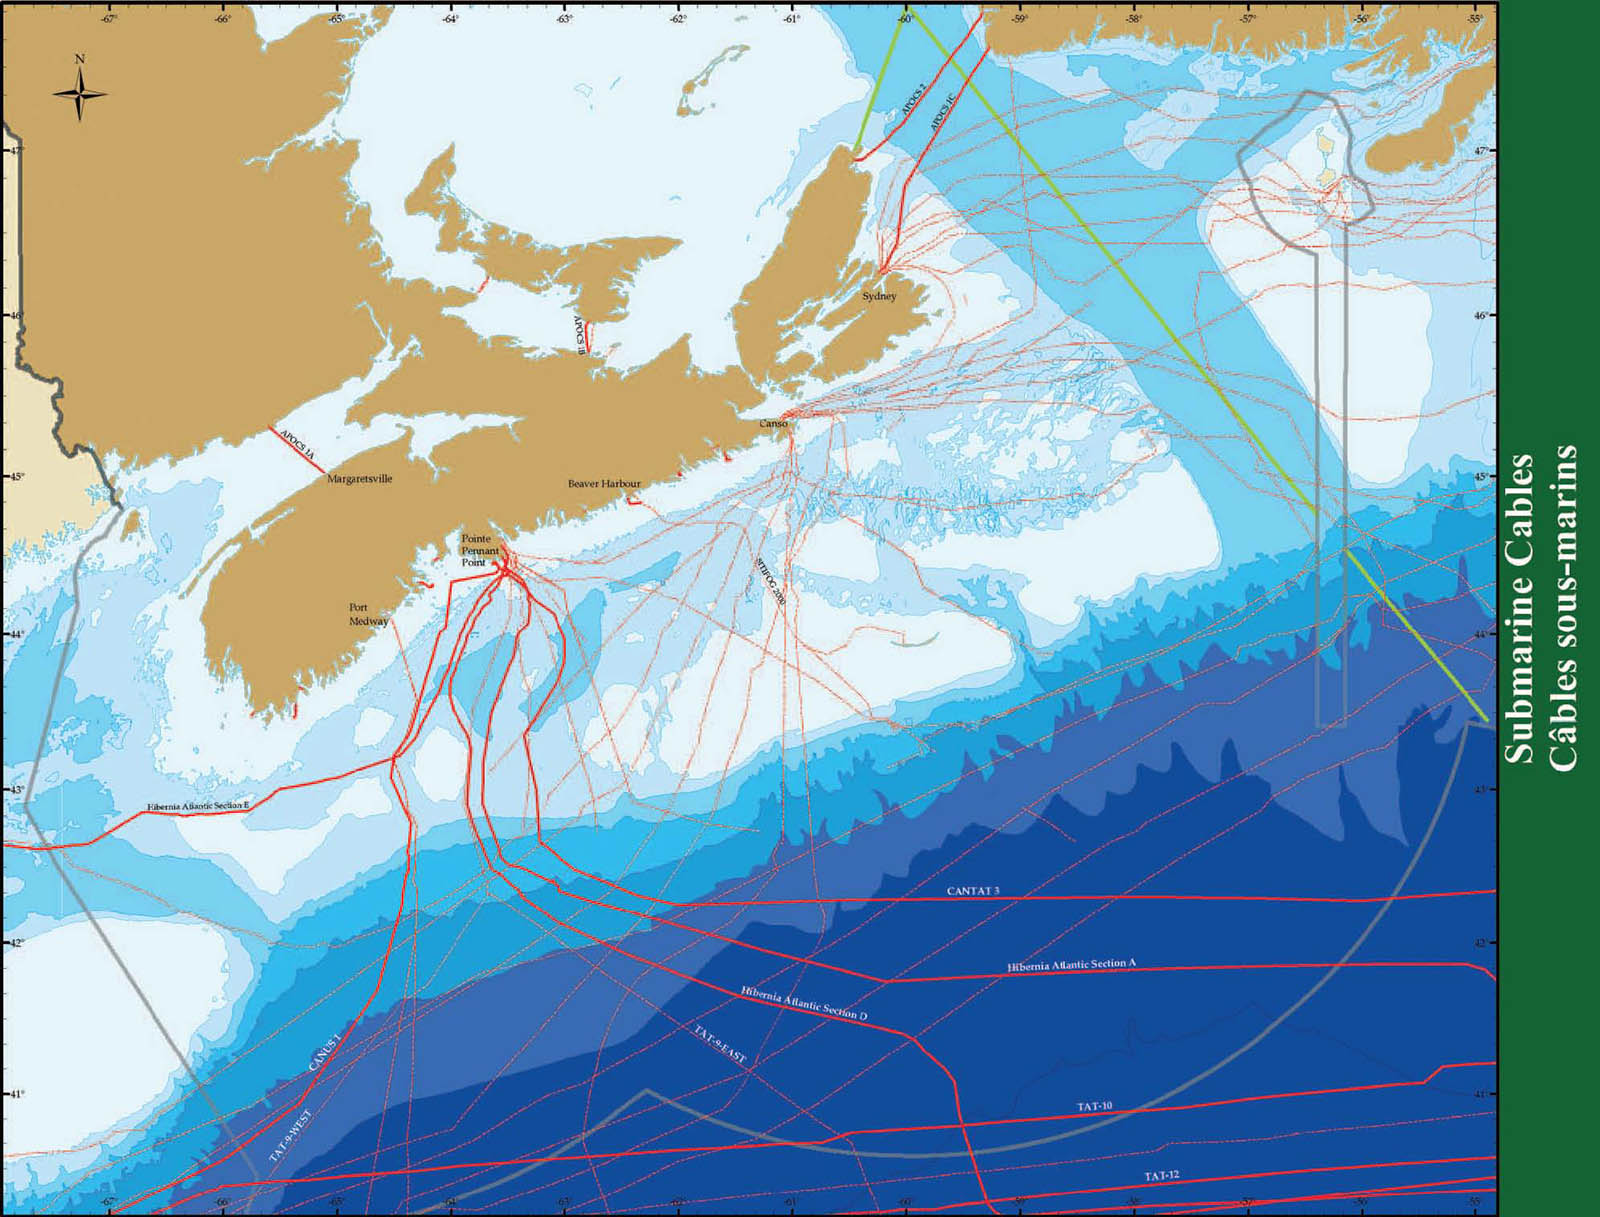 Submarine cables